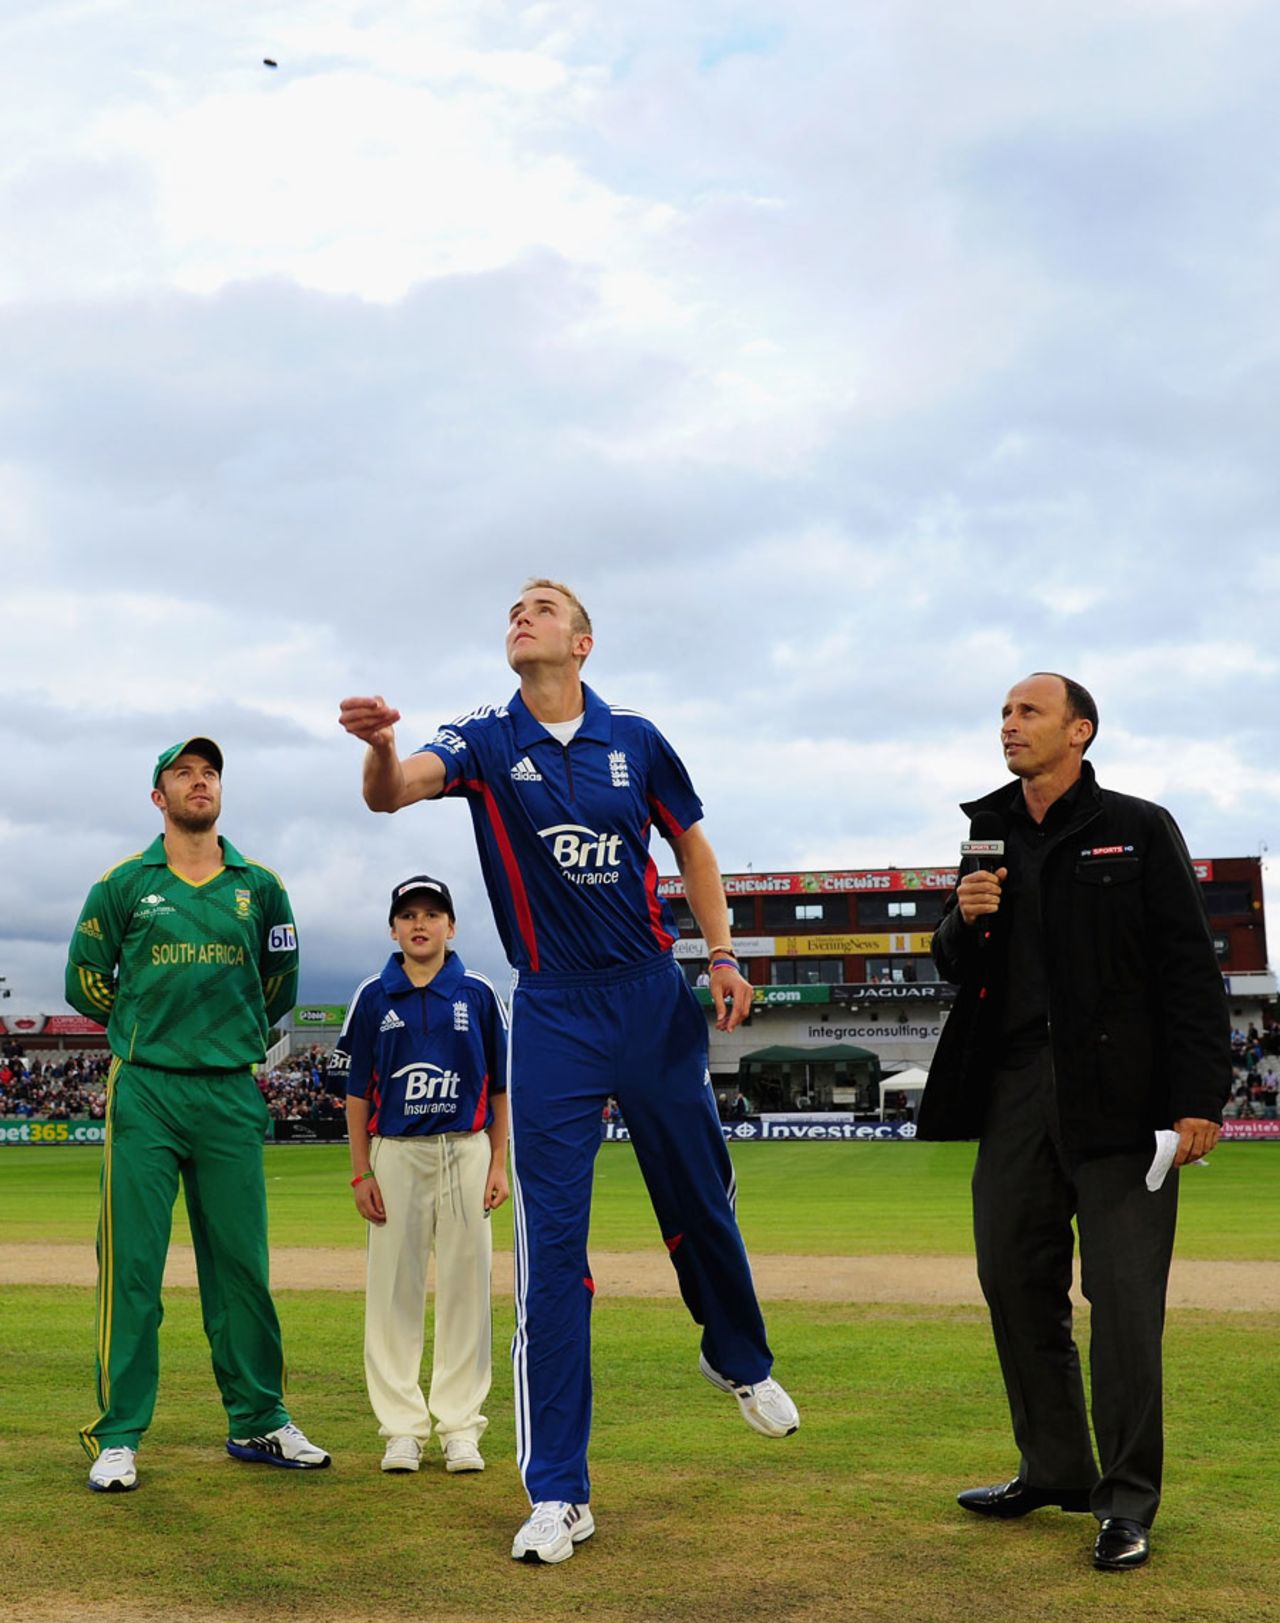 Stuart Broad won the toss and chose to bowl, England v South Africa, 2nd T20, Old Trafford, September, 10, 2012